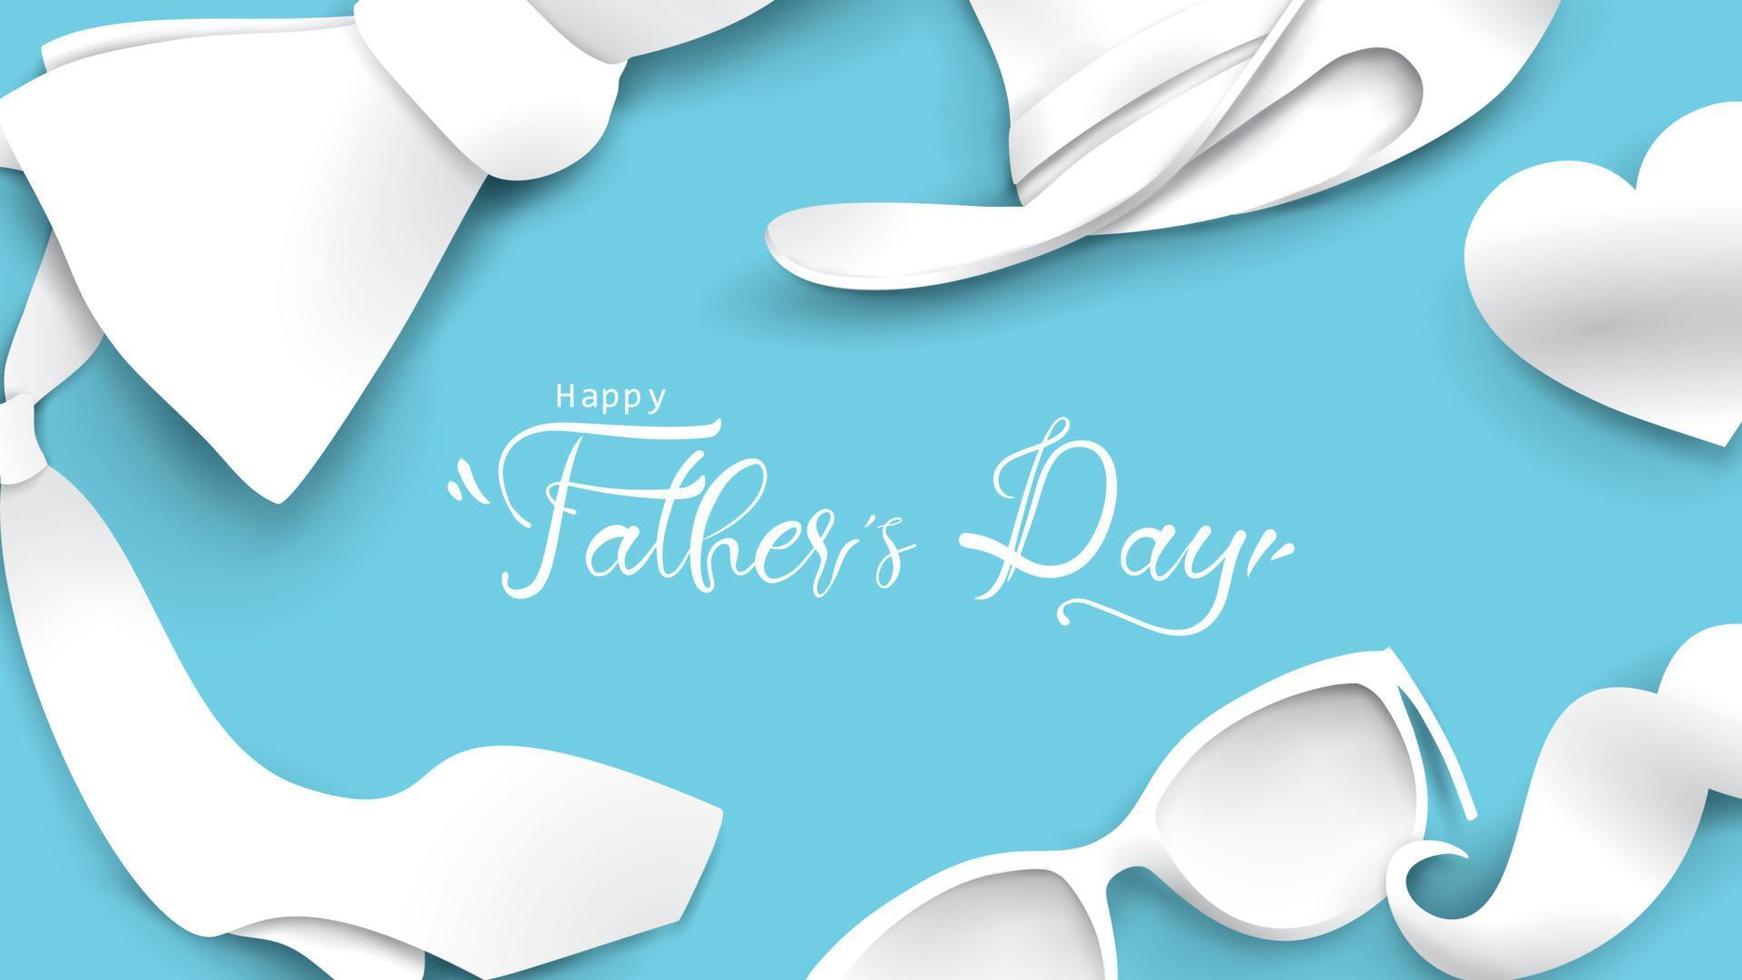 Happy Father Day greeting card, banner design with lettering, typography in three dimensional style vector